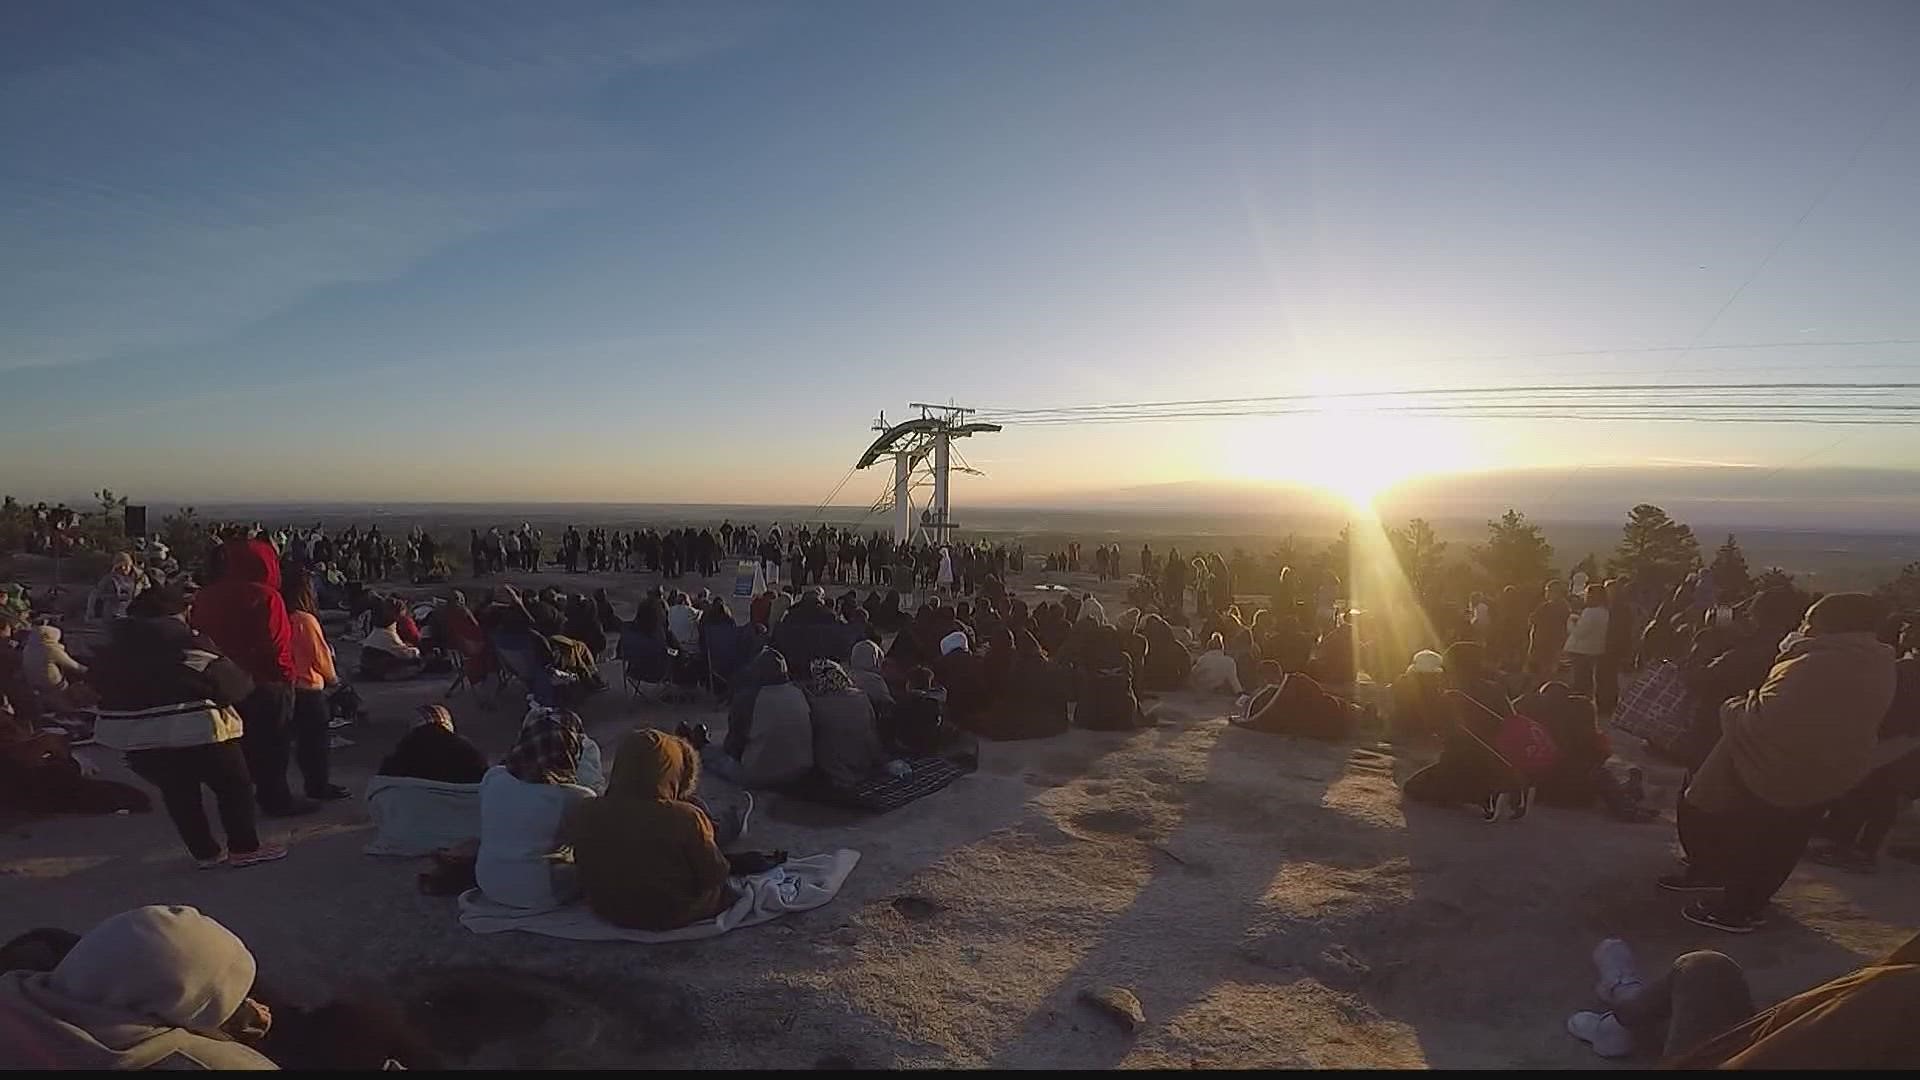 76th Annual Easter Sunrise Service at Stone Mountain Park